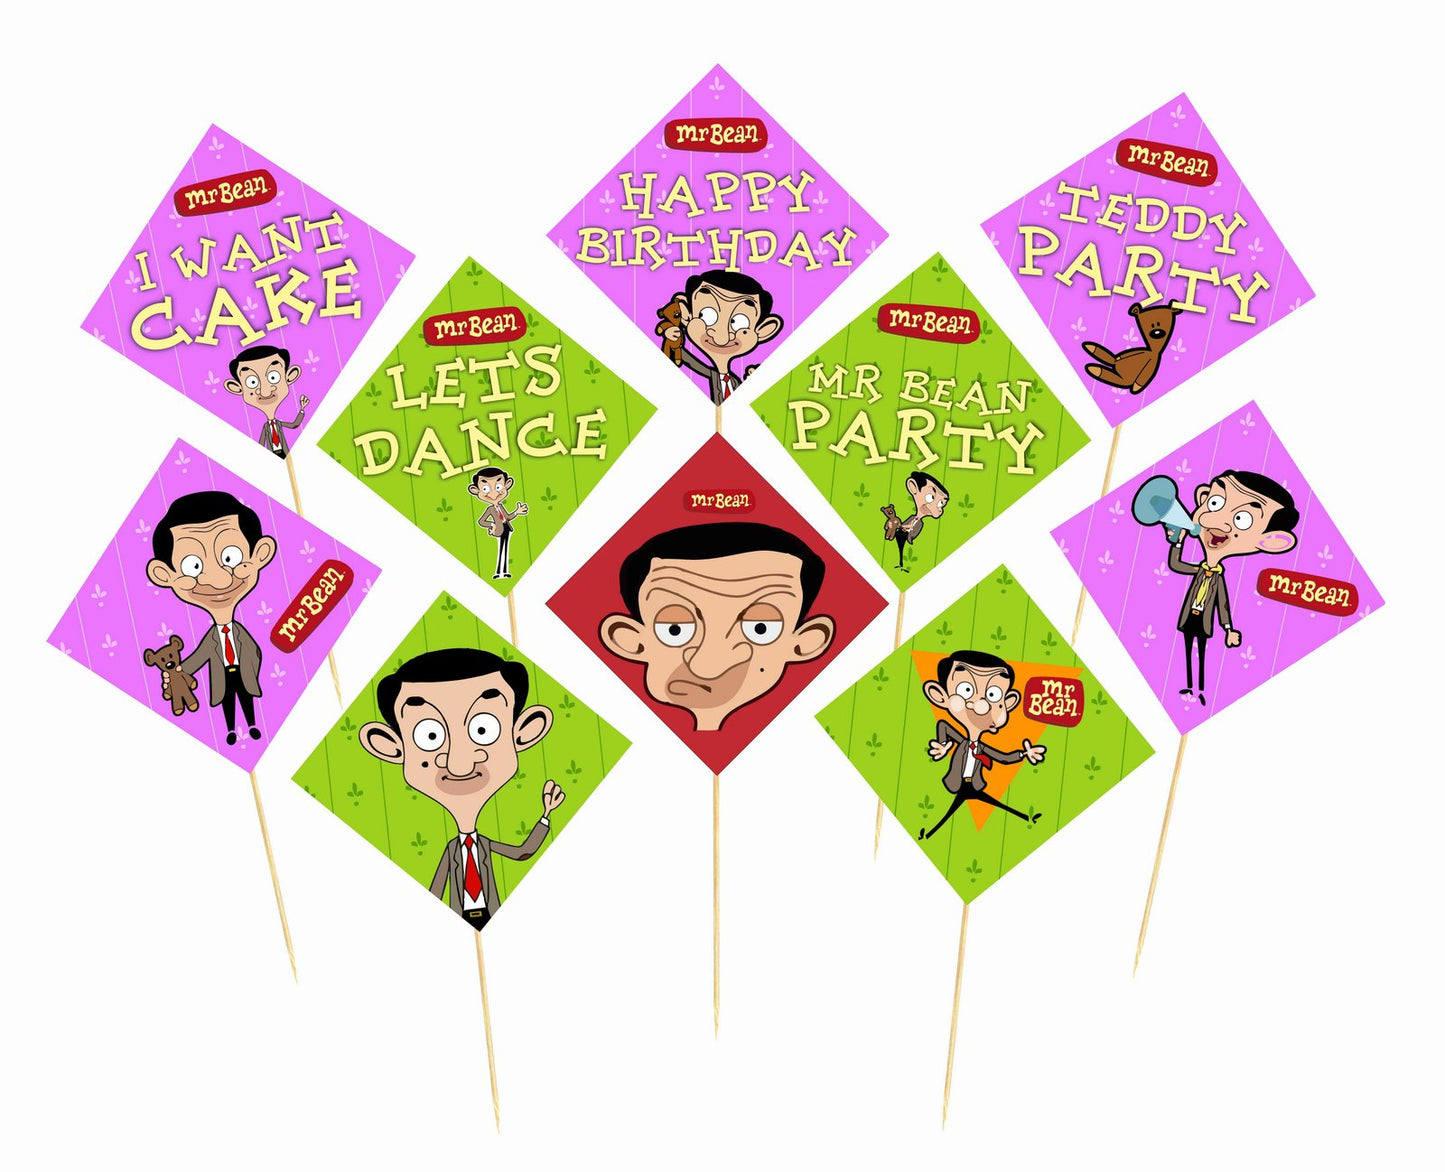 Mr Bean Theme Birthday Photo Booth Party Props Theme Birthday Party Decoration, Birthday Photo Booth Party Item for Adults and Kids